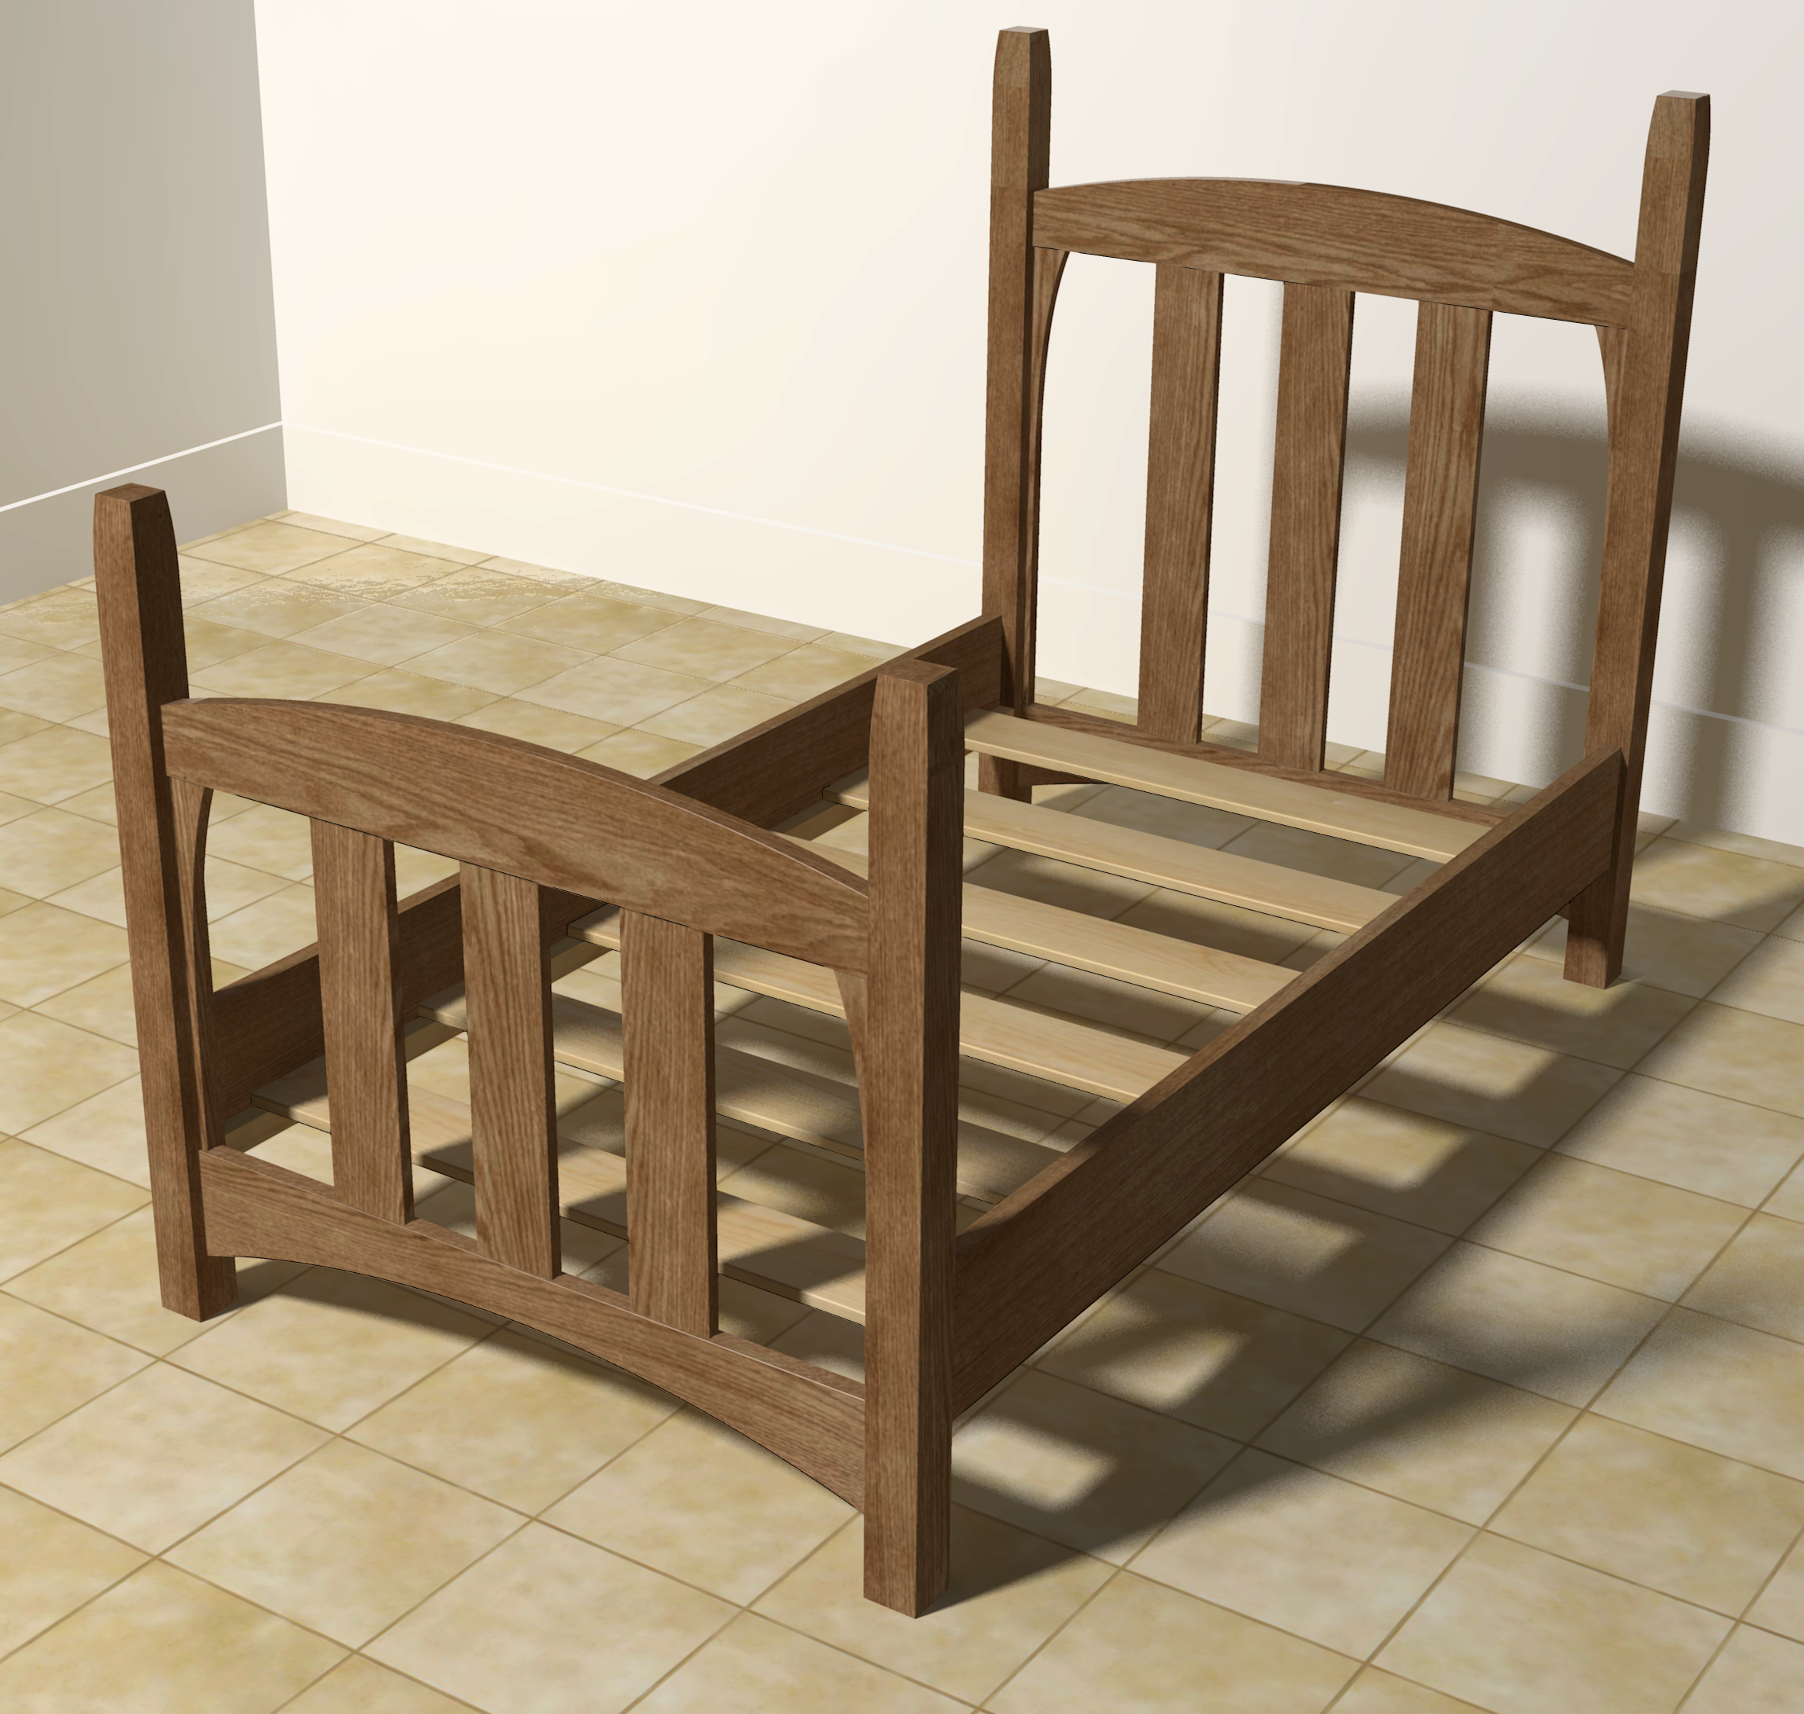 GStickley bed.png